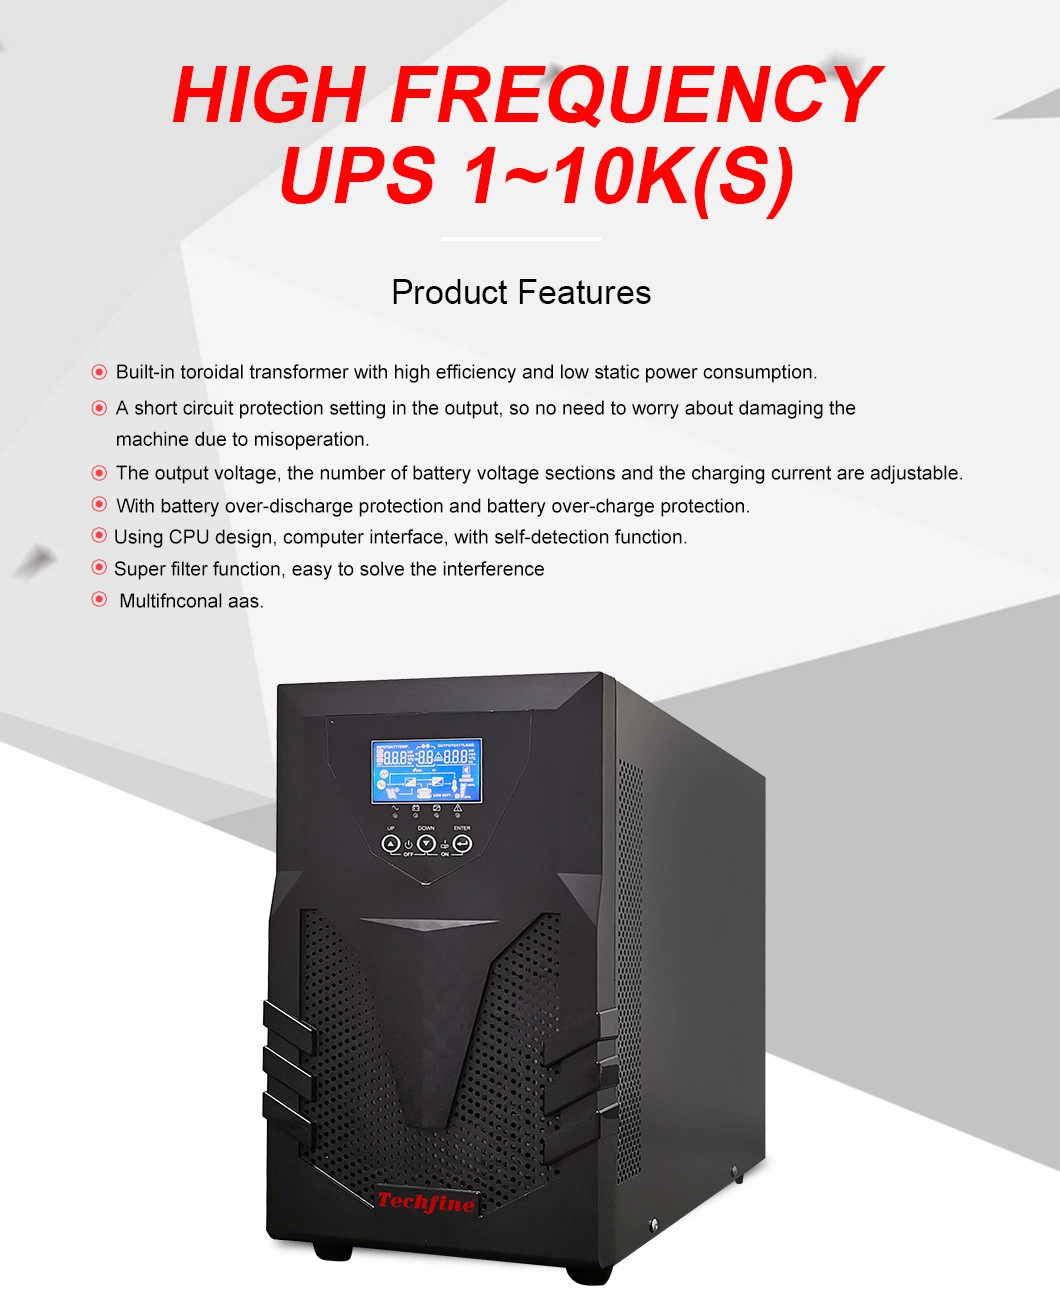 Techfine Invented UPS/Uninterruptible Power Supply Backup battery Power Station /UPS Charger with USB Port